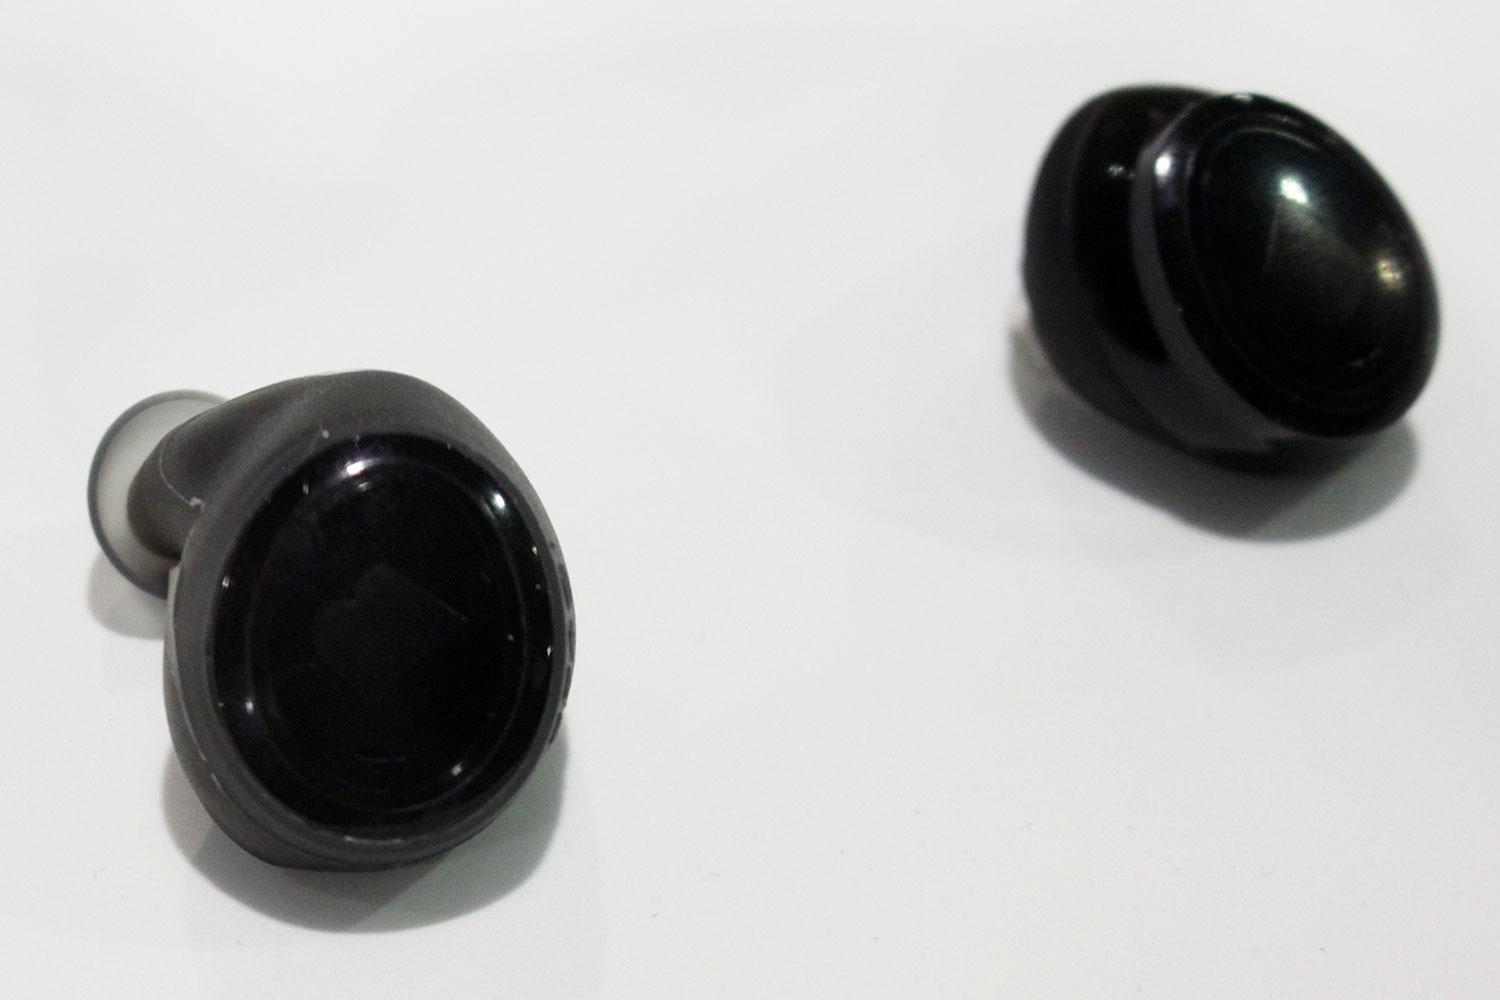 feature packed dash headphones surface at ces bragi 1